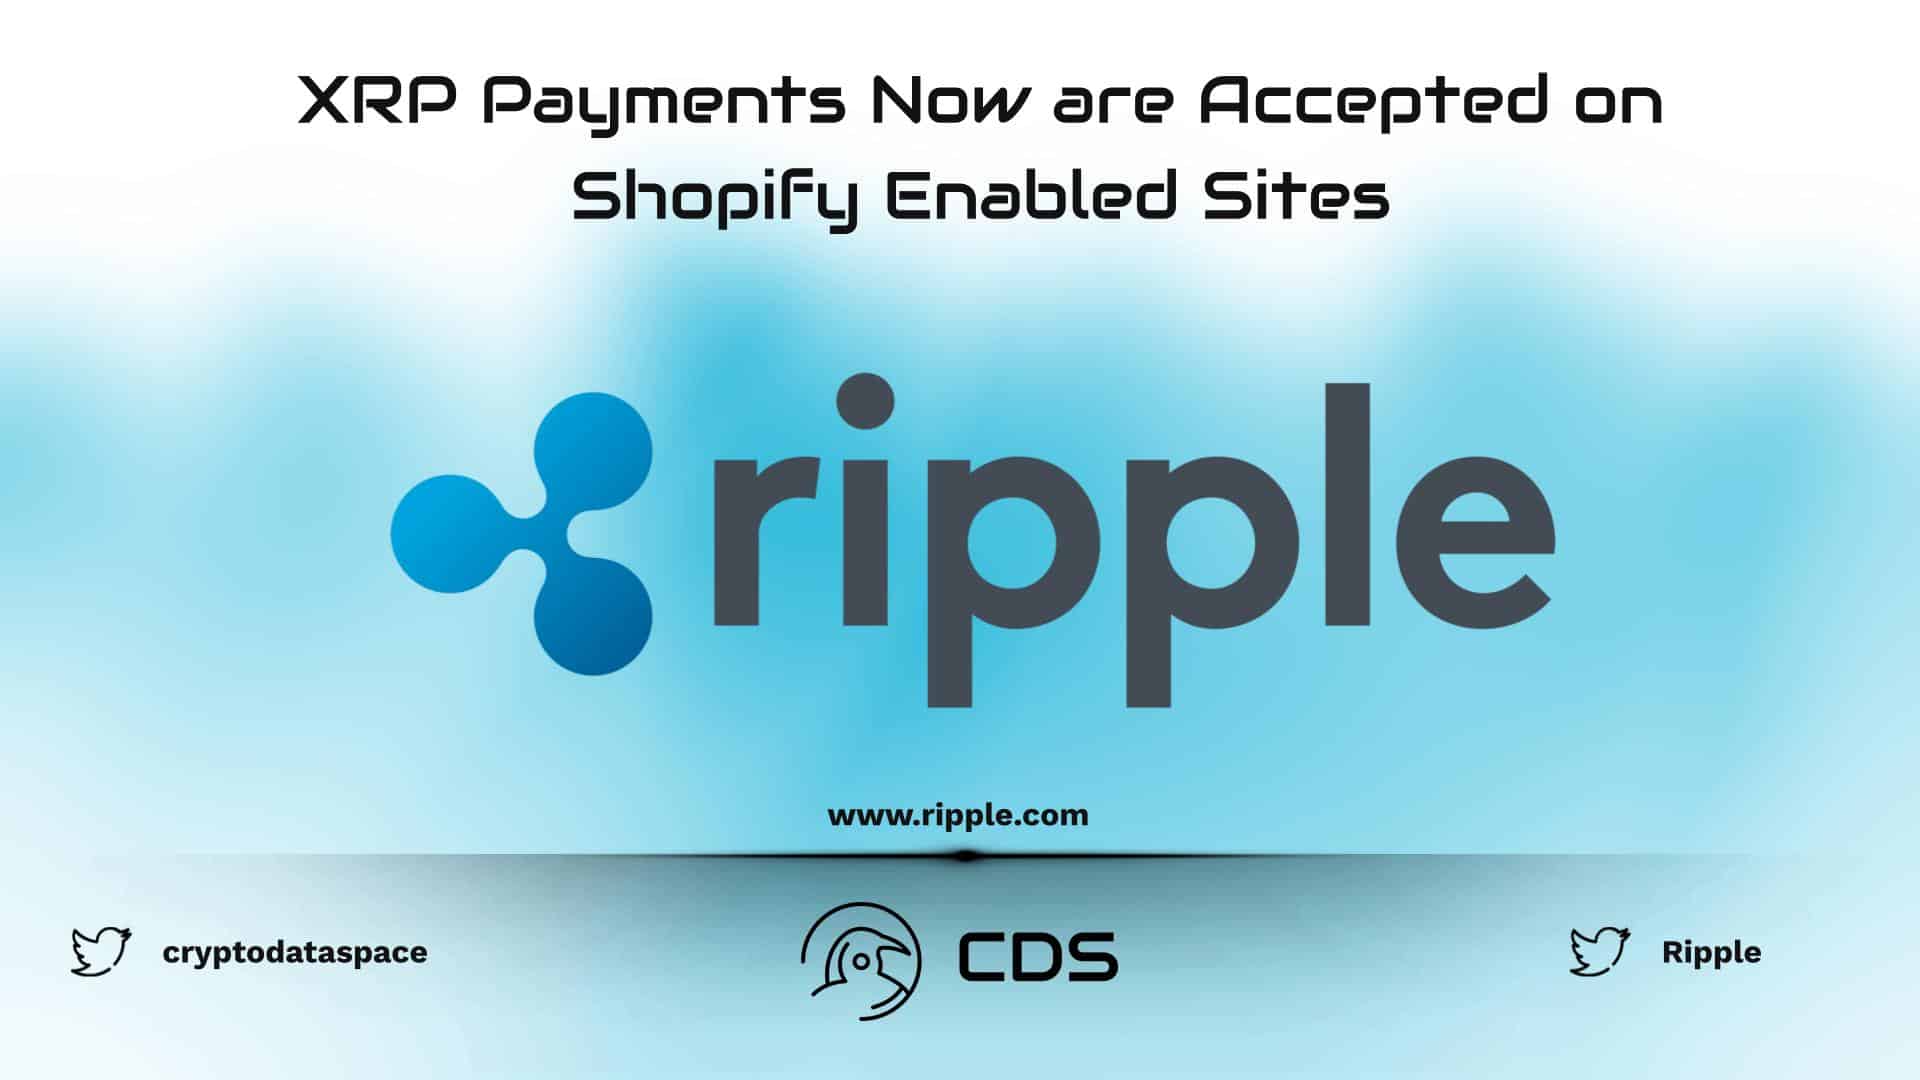 XRP Payments Now are Accepted on Shopify Enabled Sites